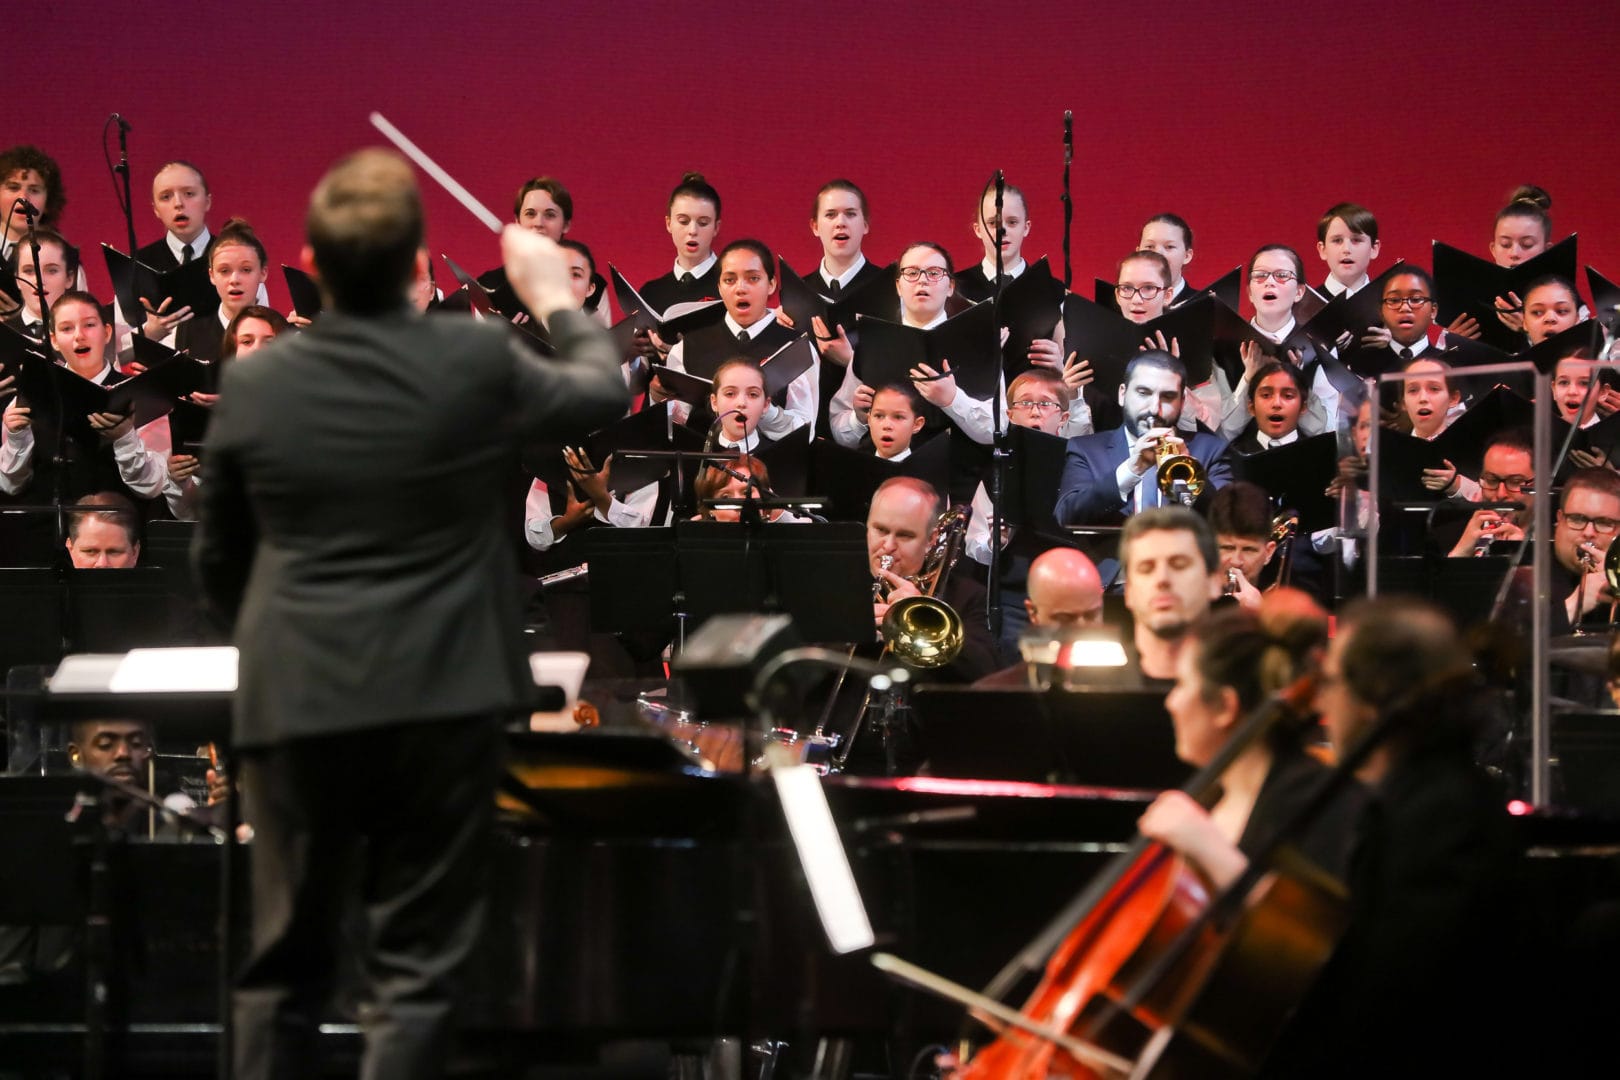 <h3>Michael Rossi conducts the orchestra, along with Ibrahim Maalouf (center-right) and the National Children’s Choir.</h3>
